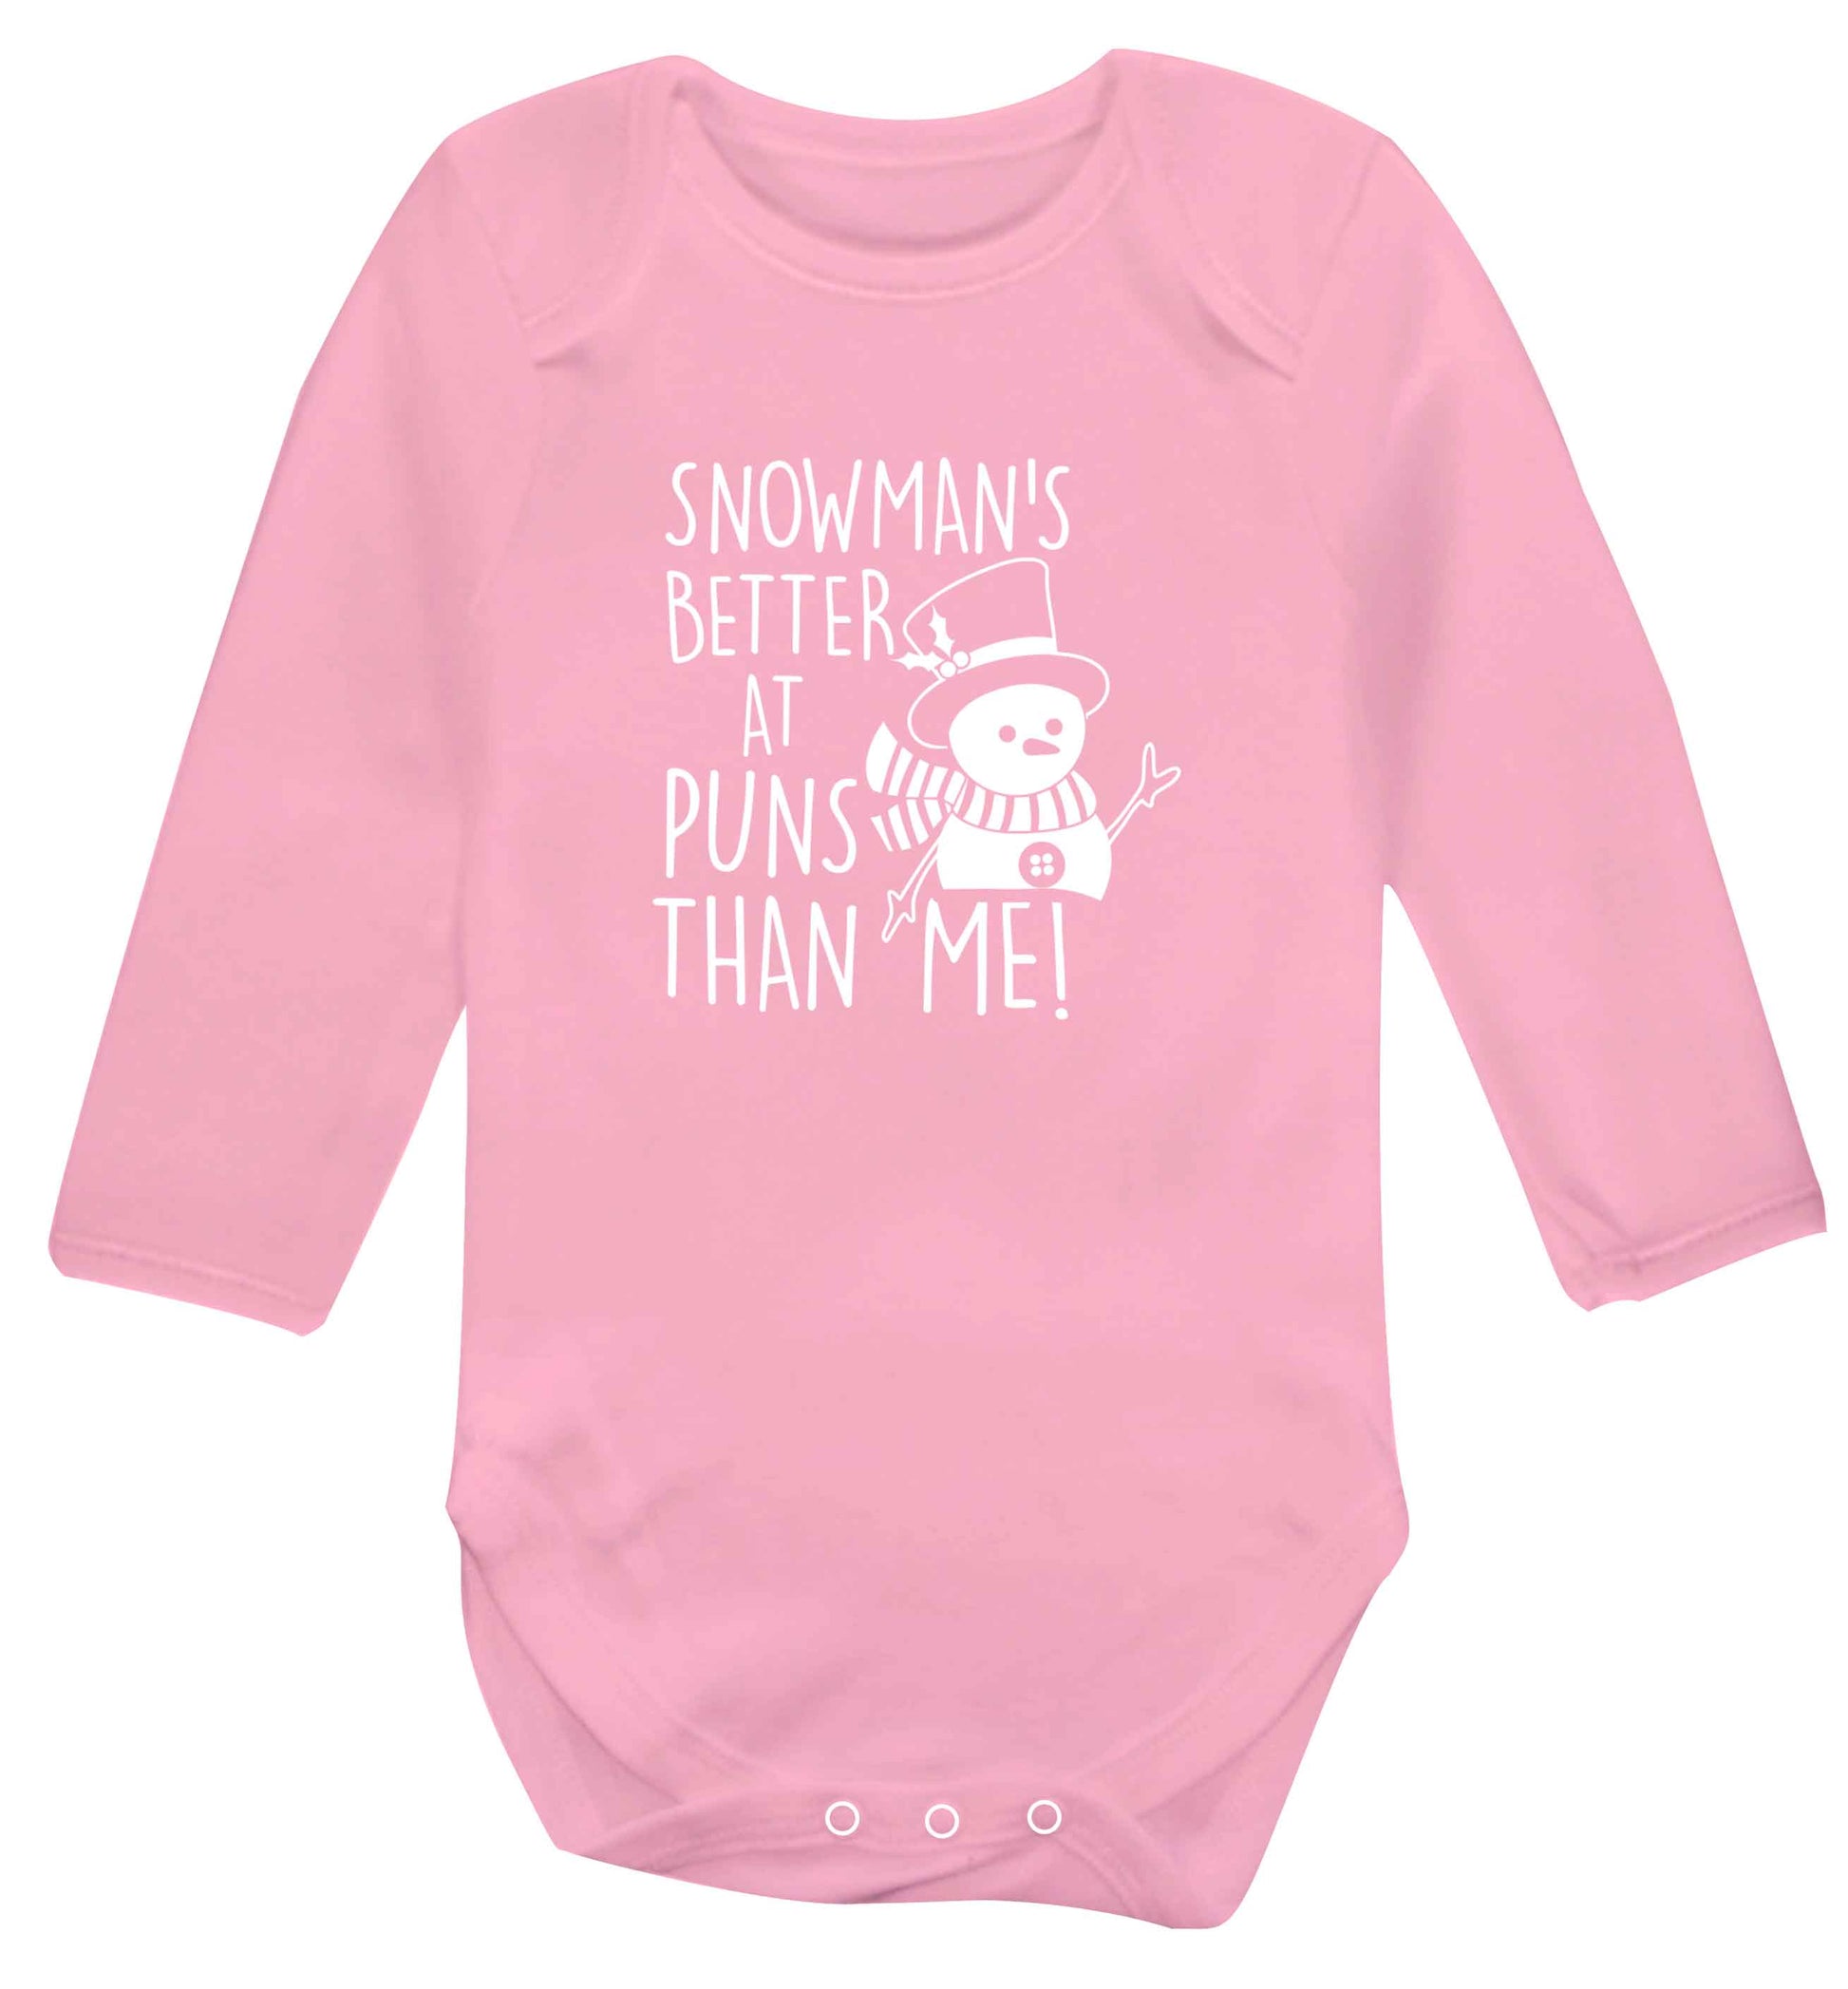 Snowman's Puns Me baby vest long sleeved pale pink 6-12 months